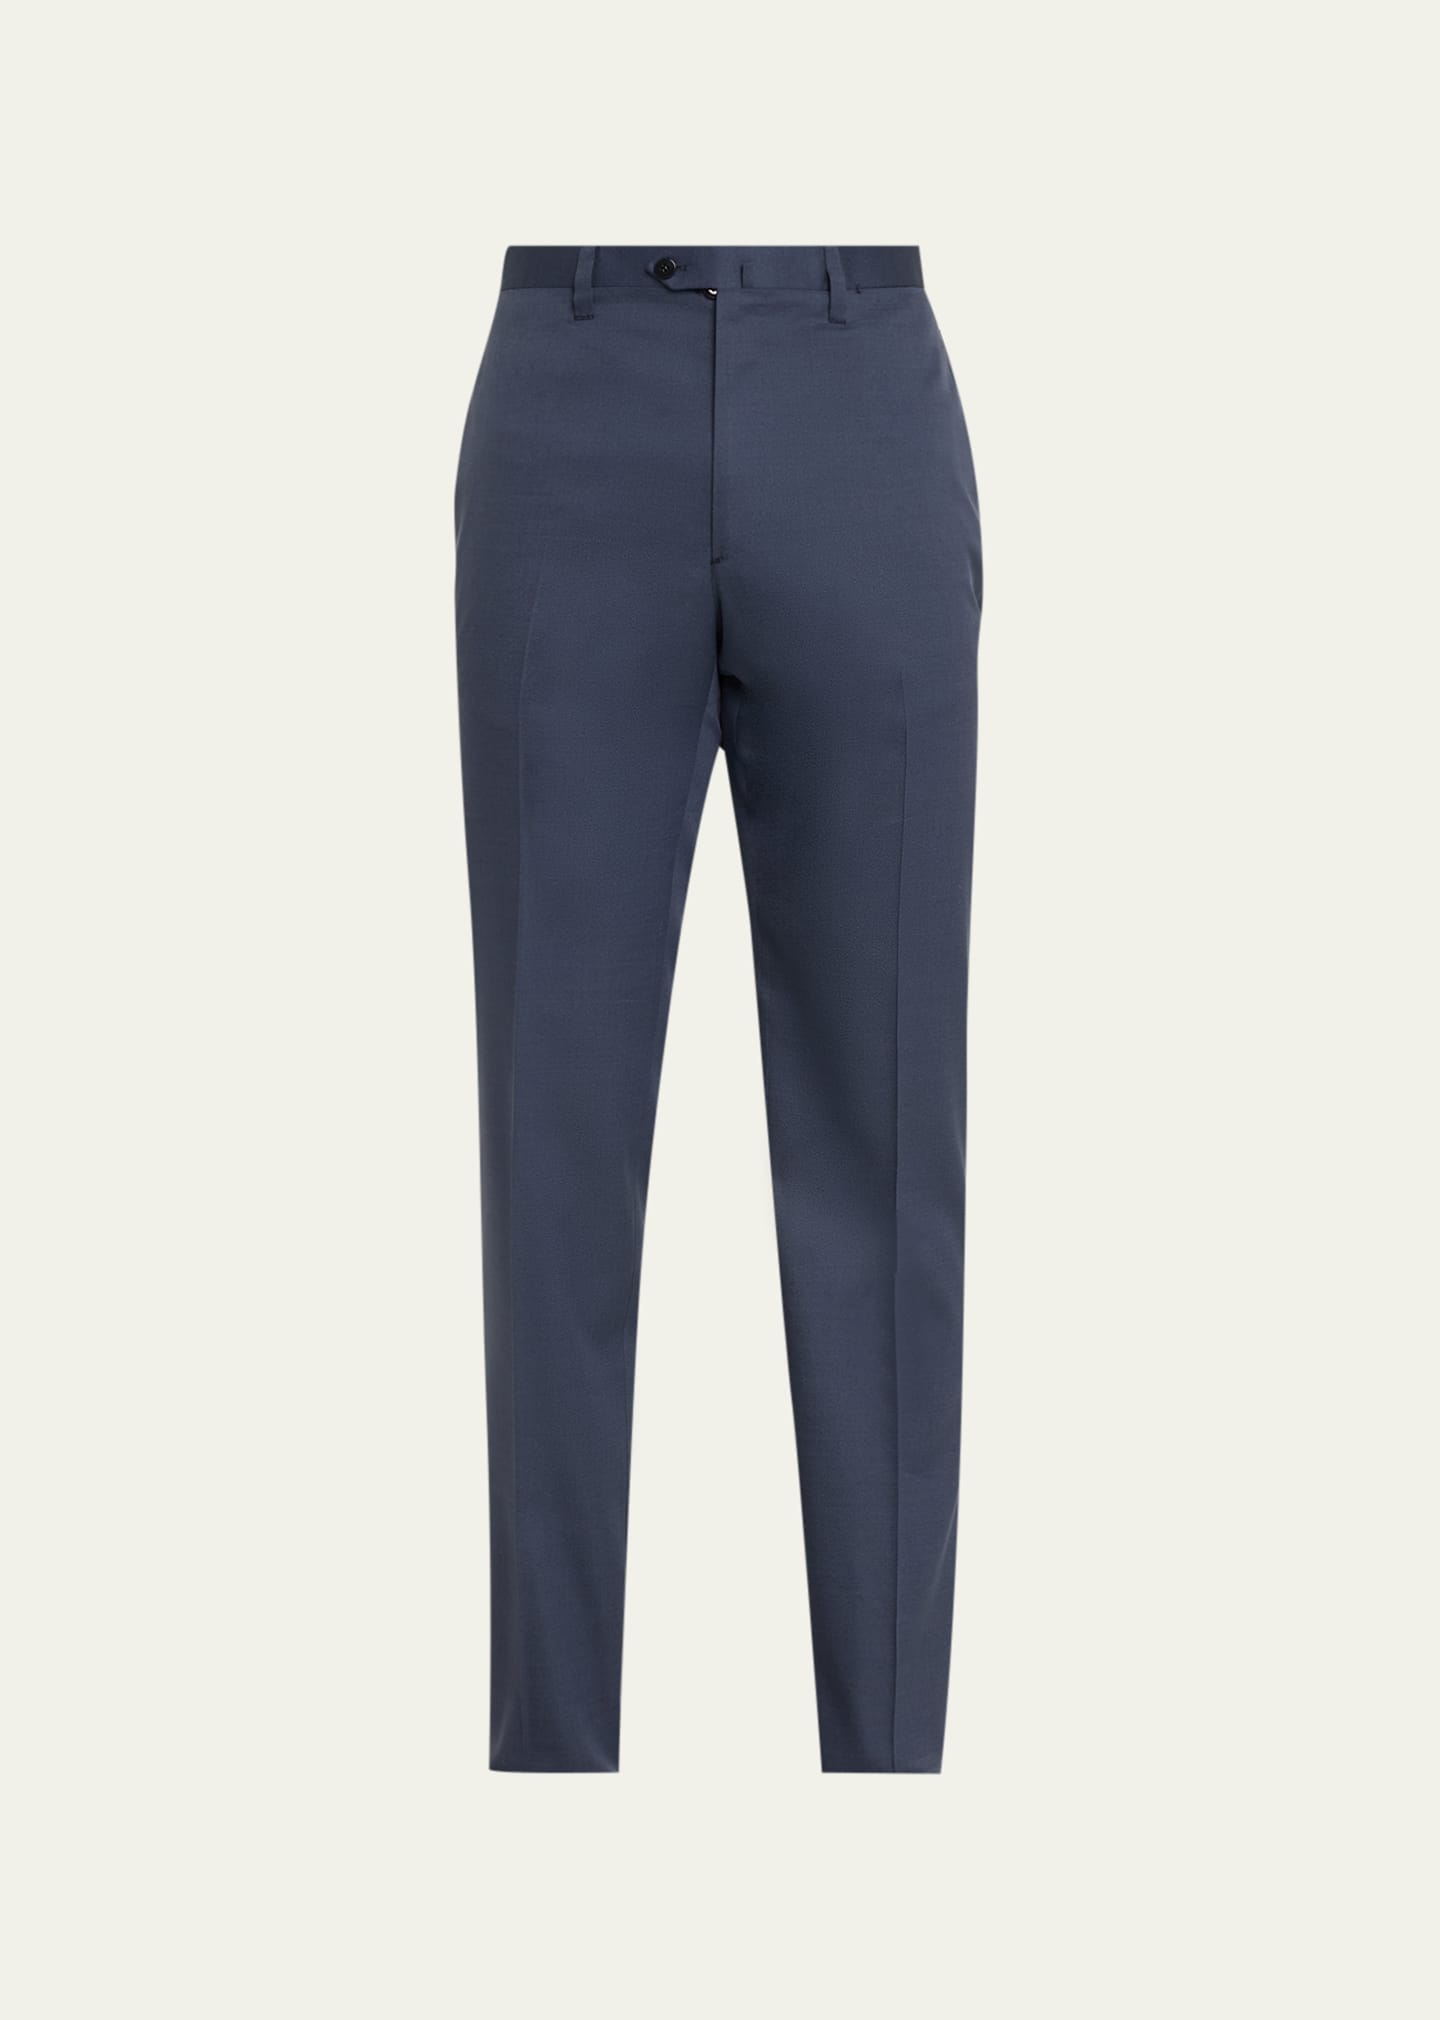 Men's Luxe Twill Flat-Front Trousers